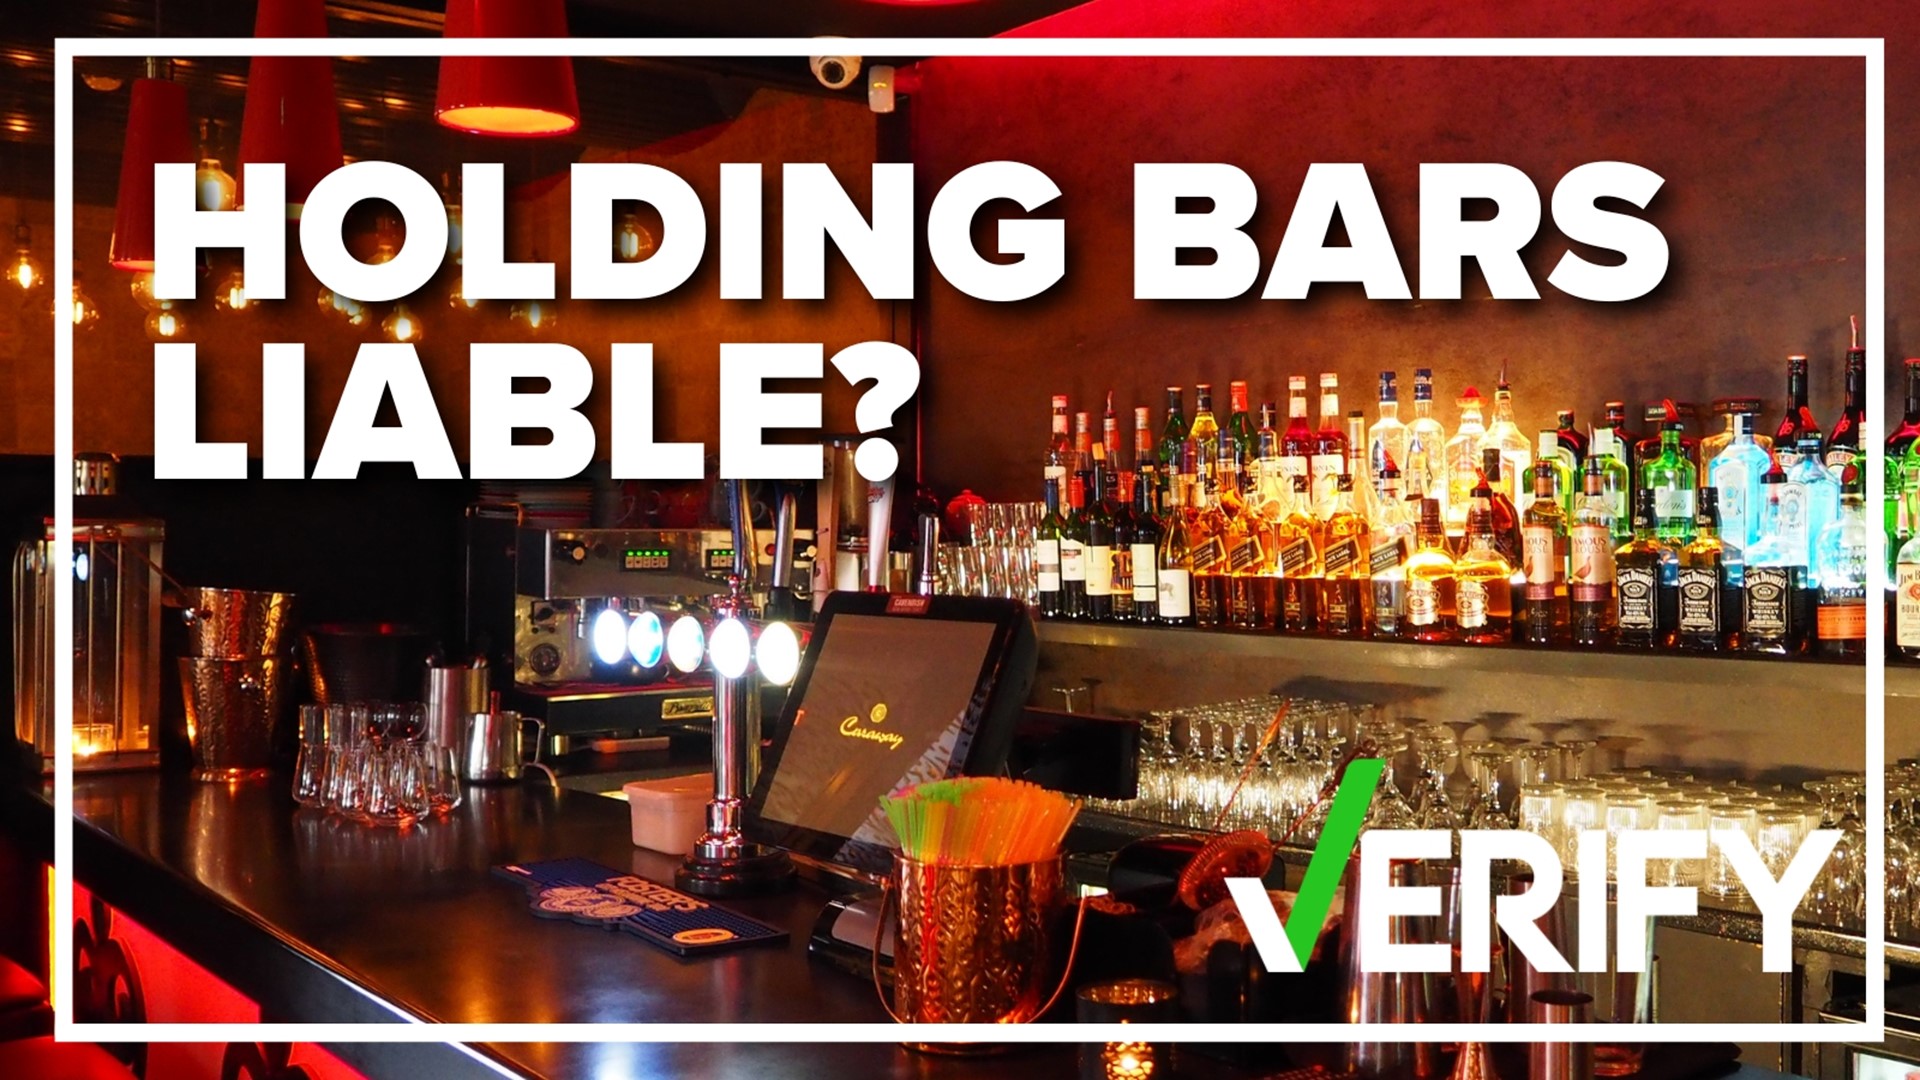 Many WCNC Charlotte viewers were wondering if the bars could be held legally responsible for a deadly crash.